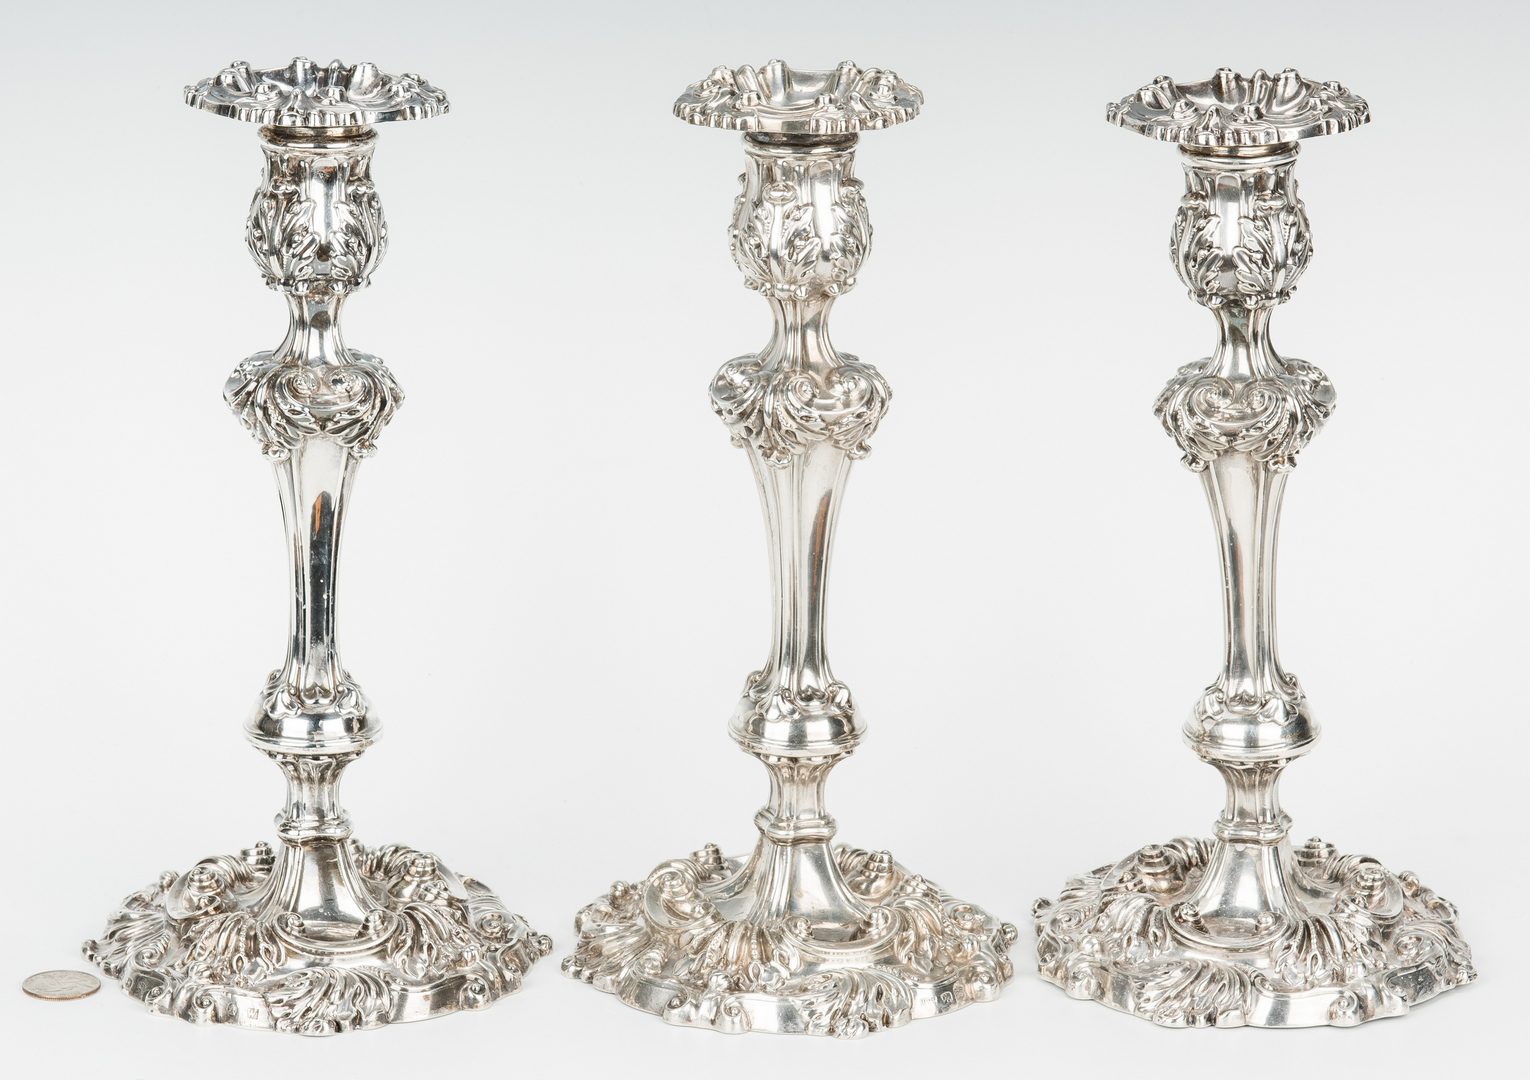 Lot 68: 3 English Sterling Silver Candlesticks